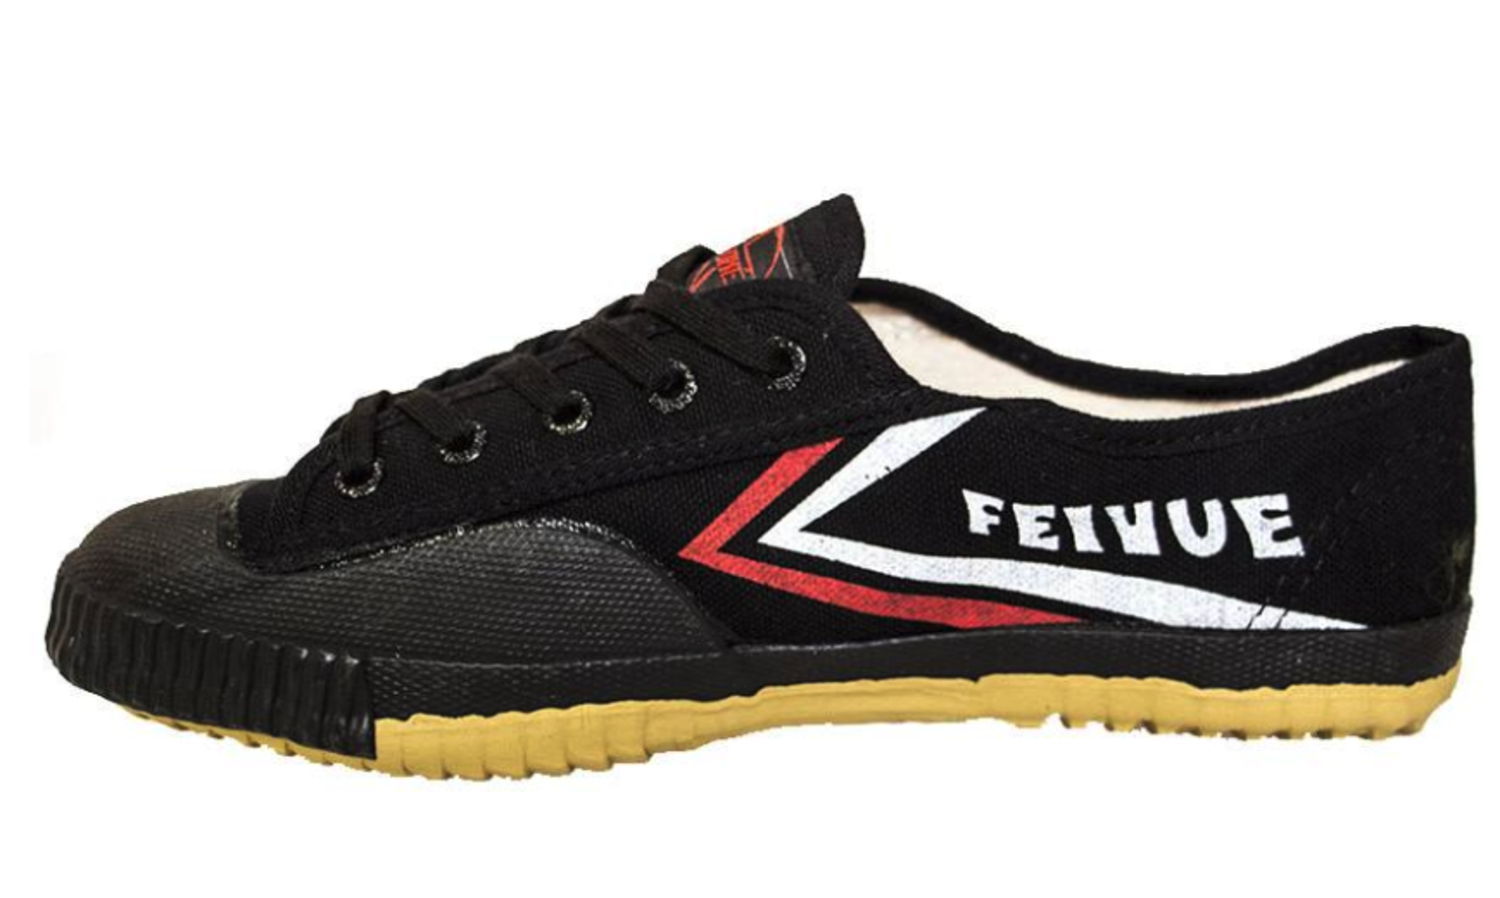 Kung Fu Shoes, Feiyue Kung Fu Shoes, White Parkour Shoes @